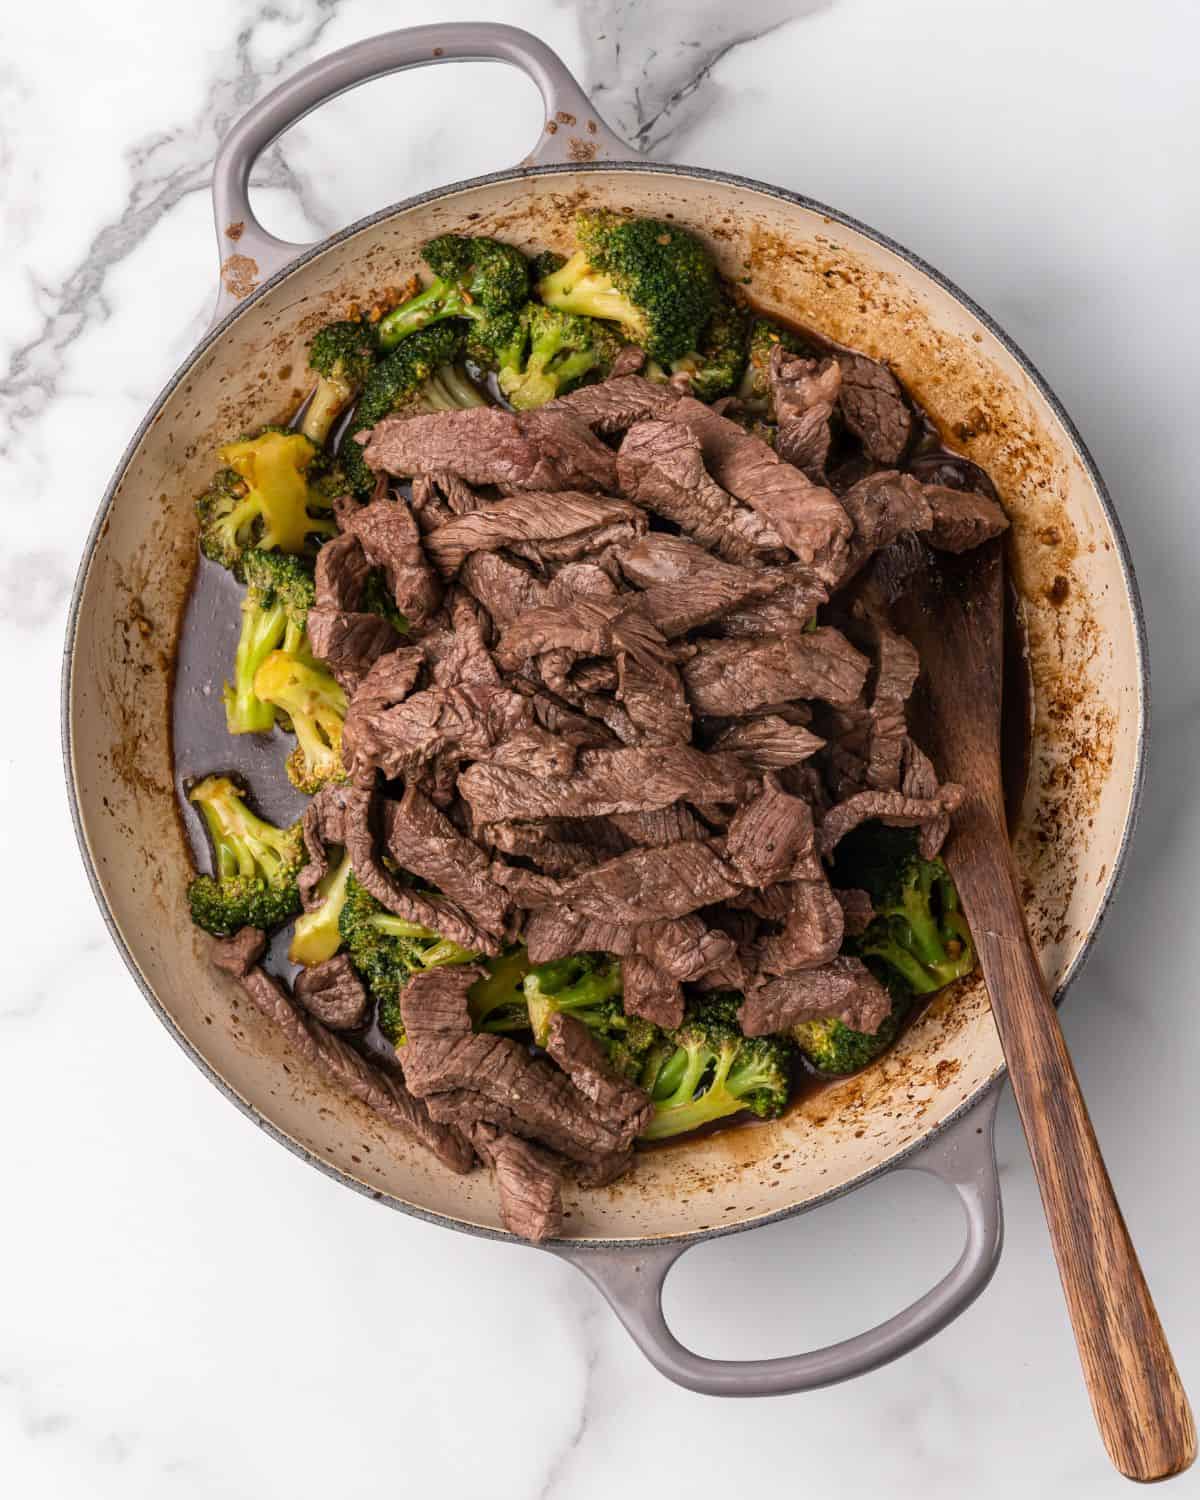 the steak strips added in with sauce and broccoli.